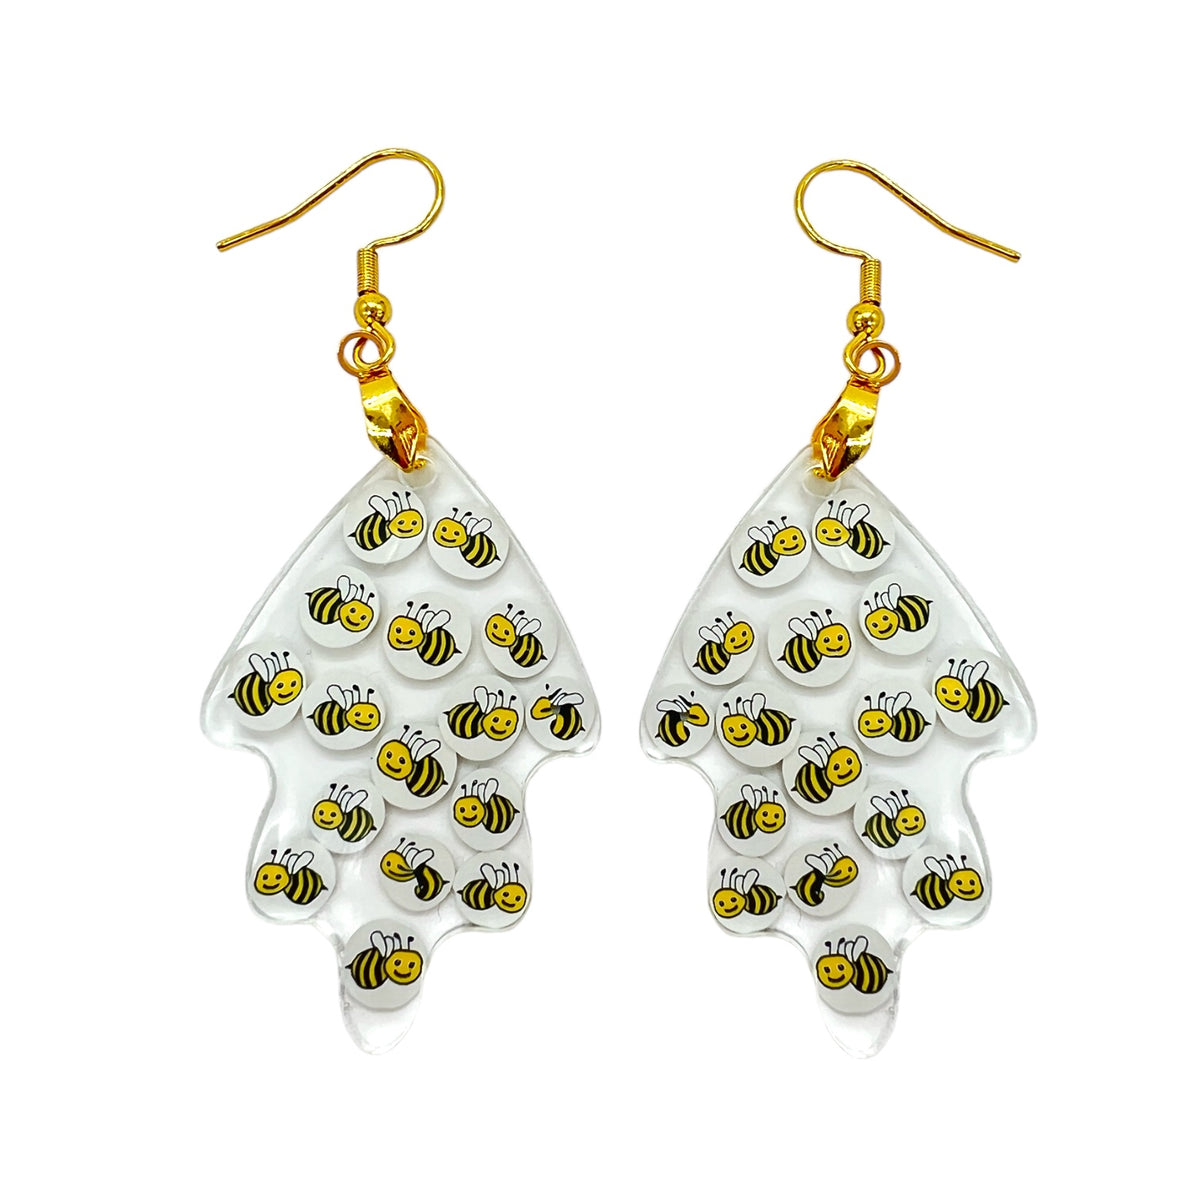 Resin Rockers Exclusive Premium Dual Leaf Dangle Earring Mold for UV and Epoxy Resin Art Jewelry